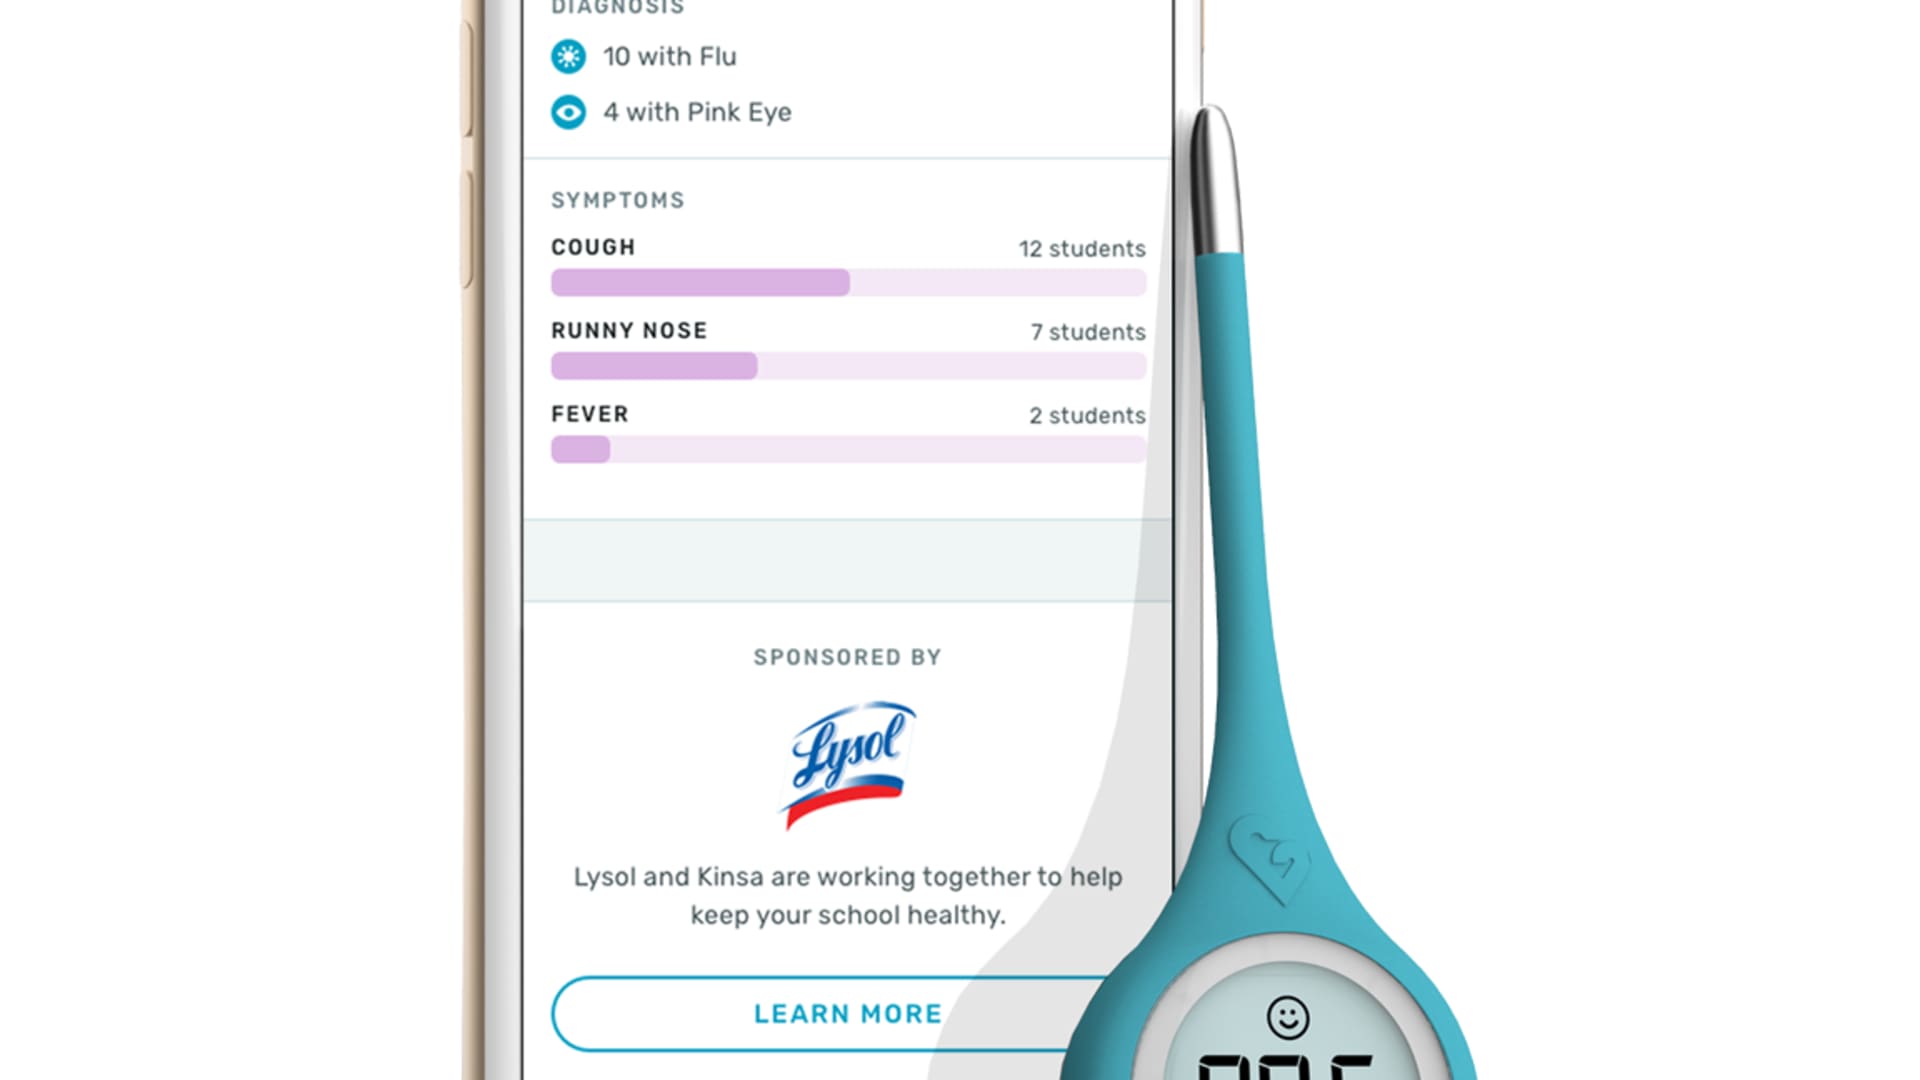 This smart thermometer could help detect COVID-19 hot spots